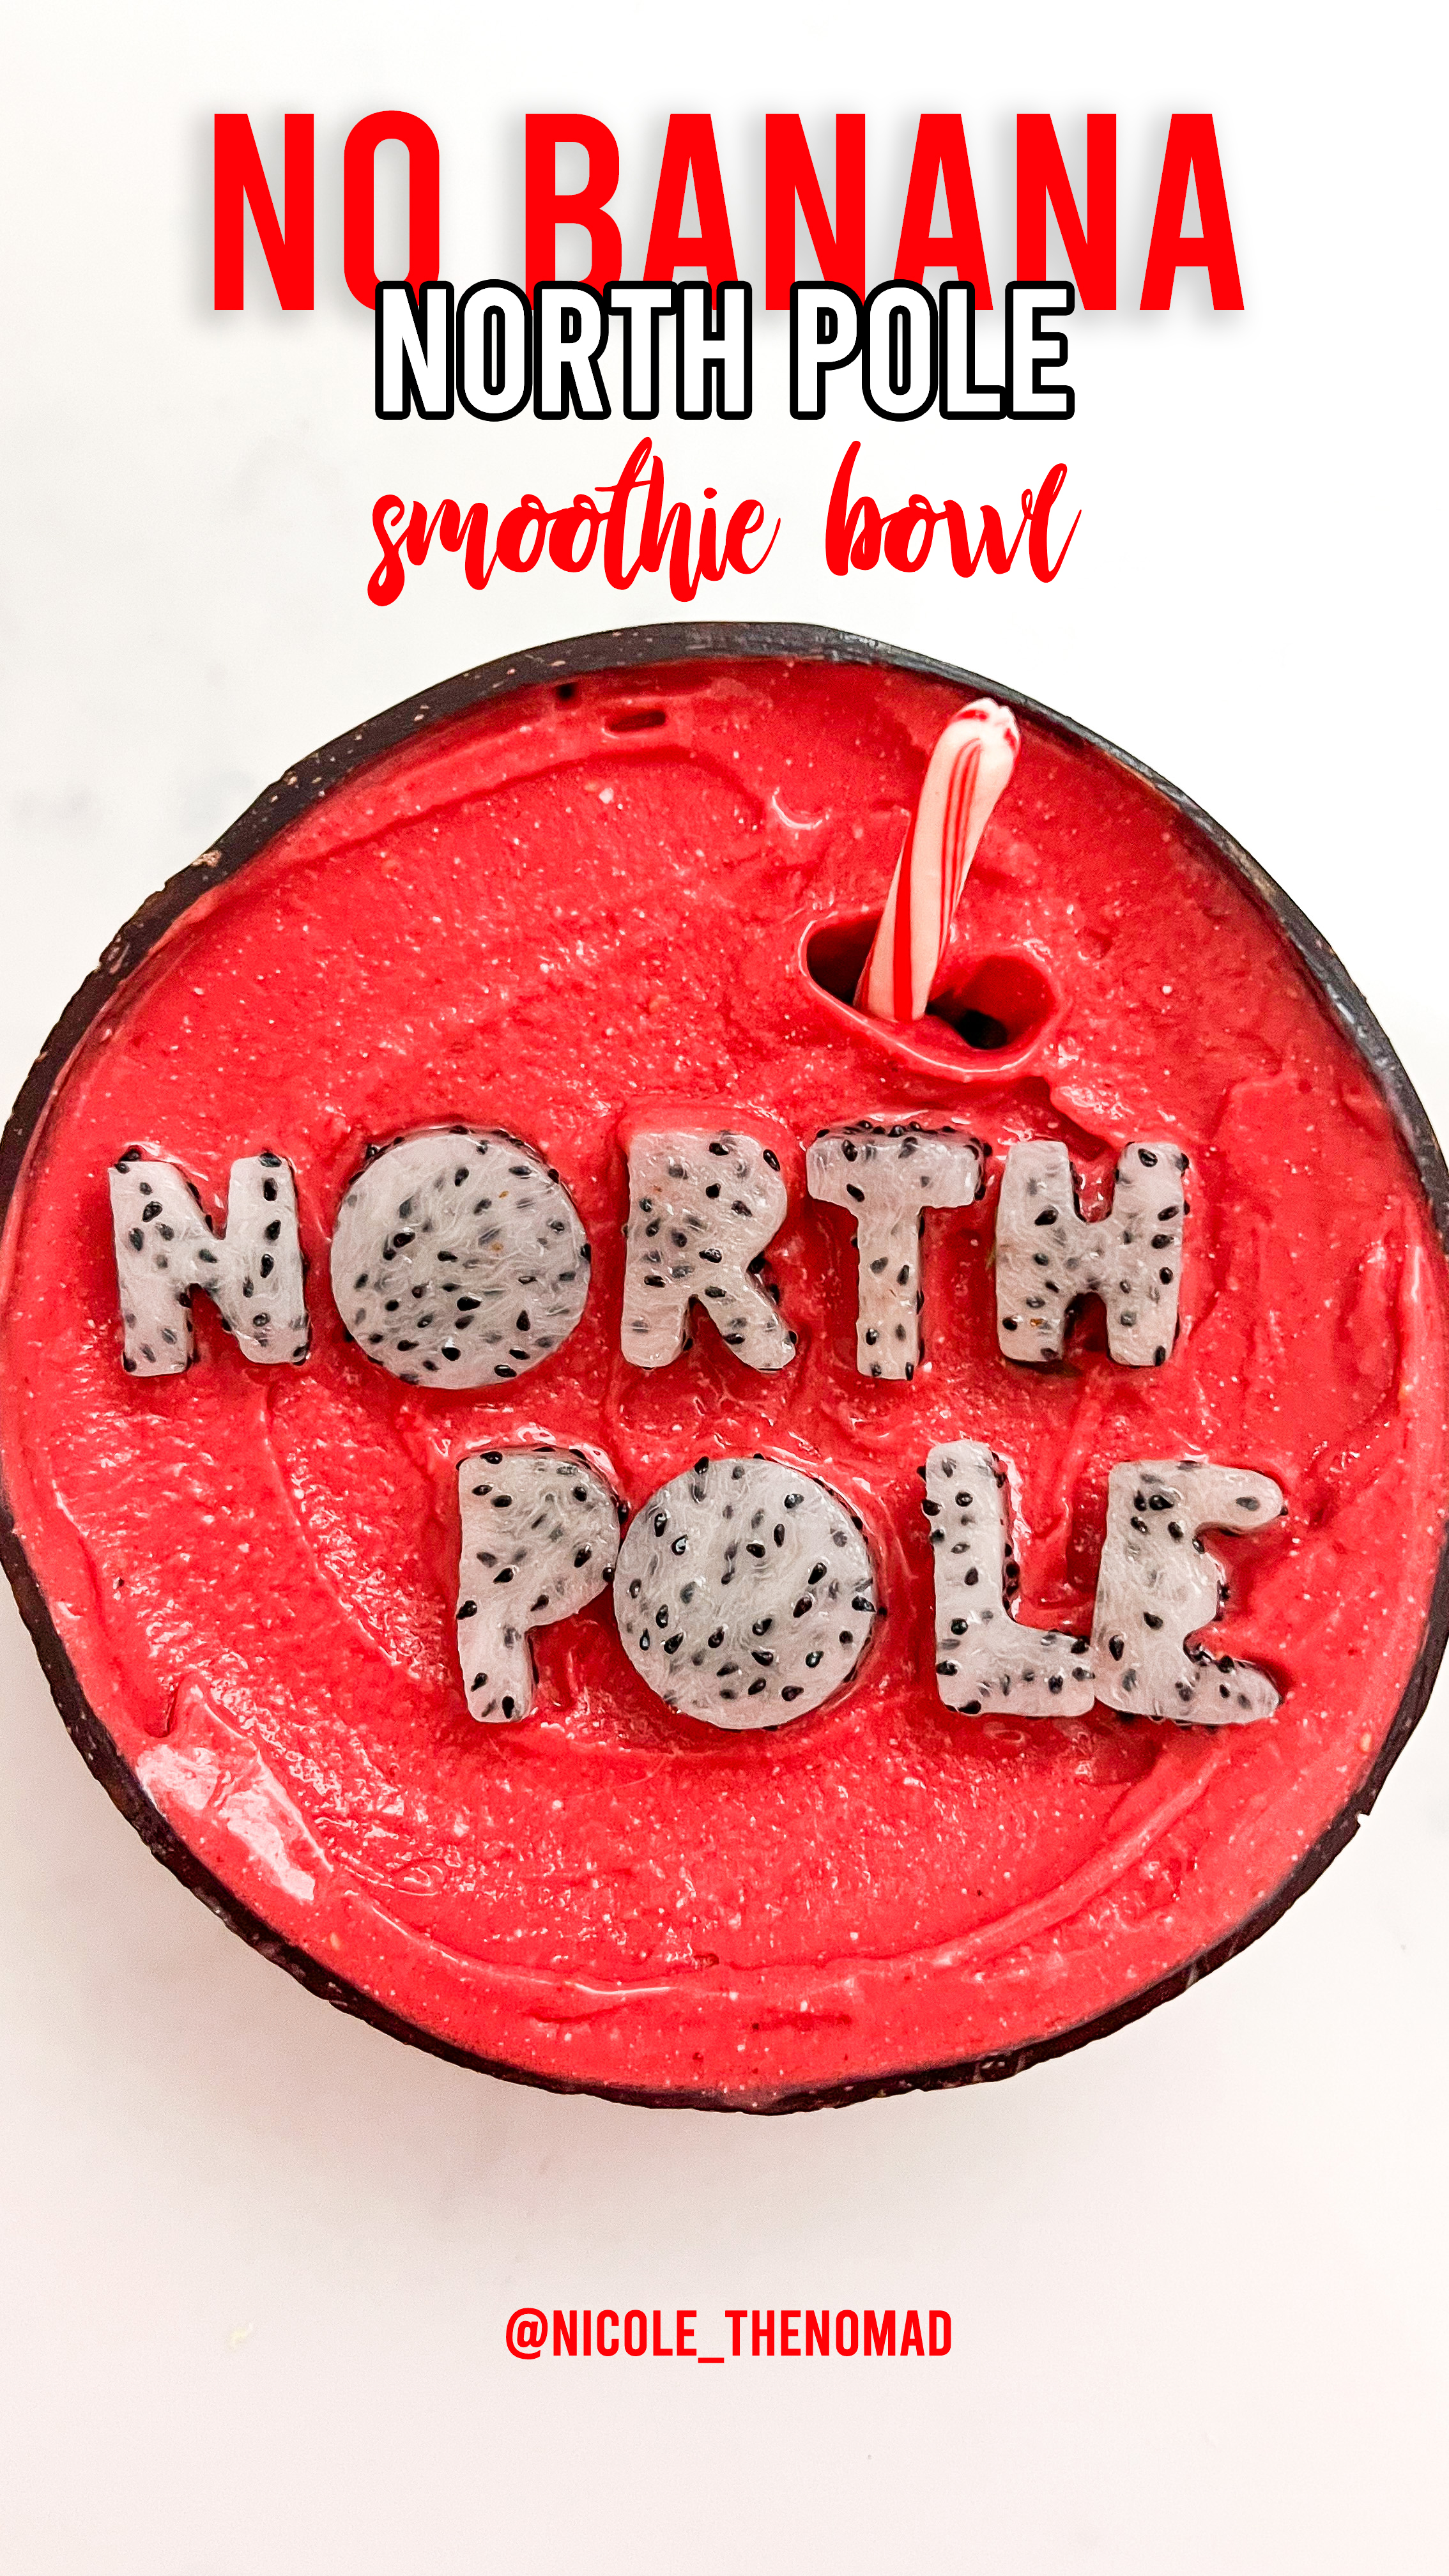 North Pole Smoothie Bowl